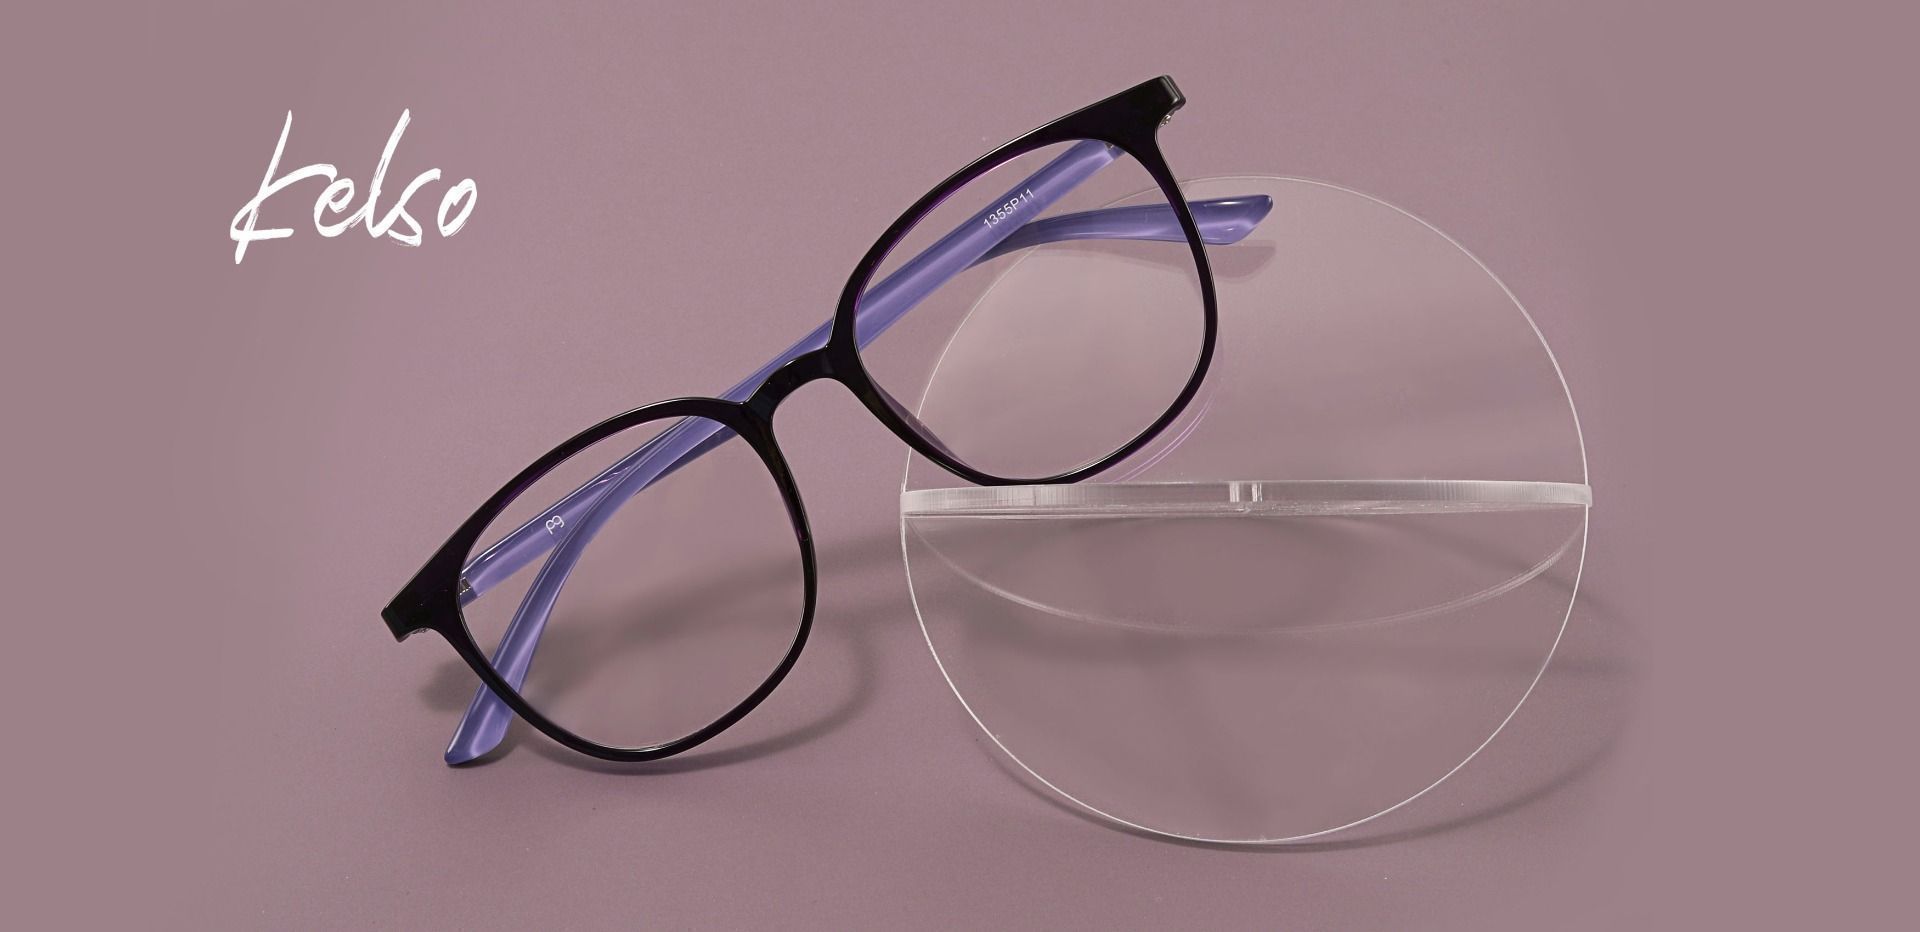 Kelso Square Lined Bifocal Glasses - Purple